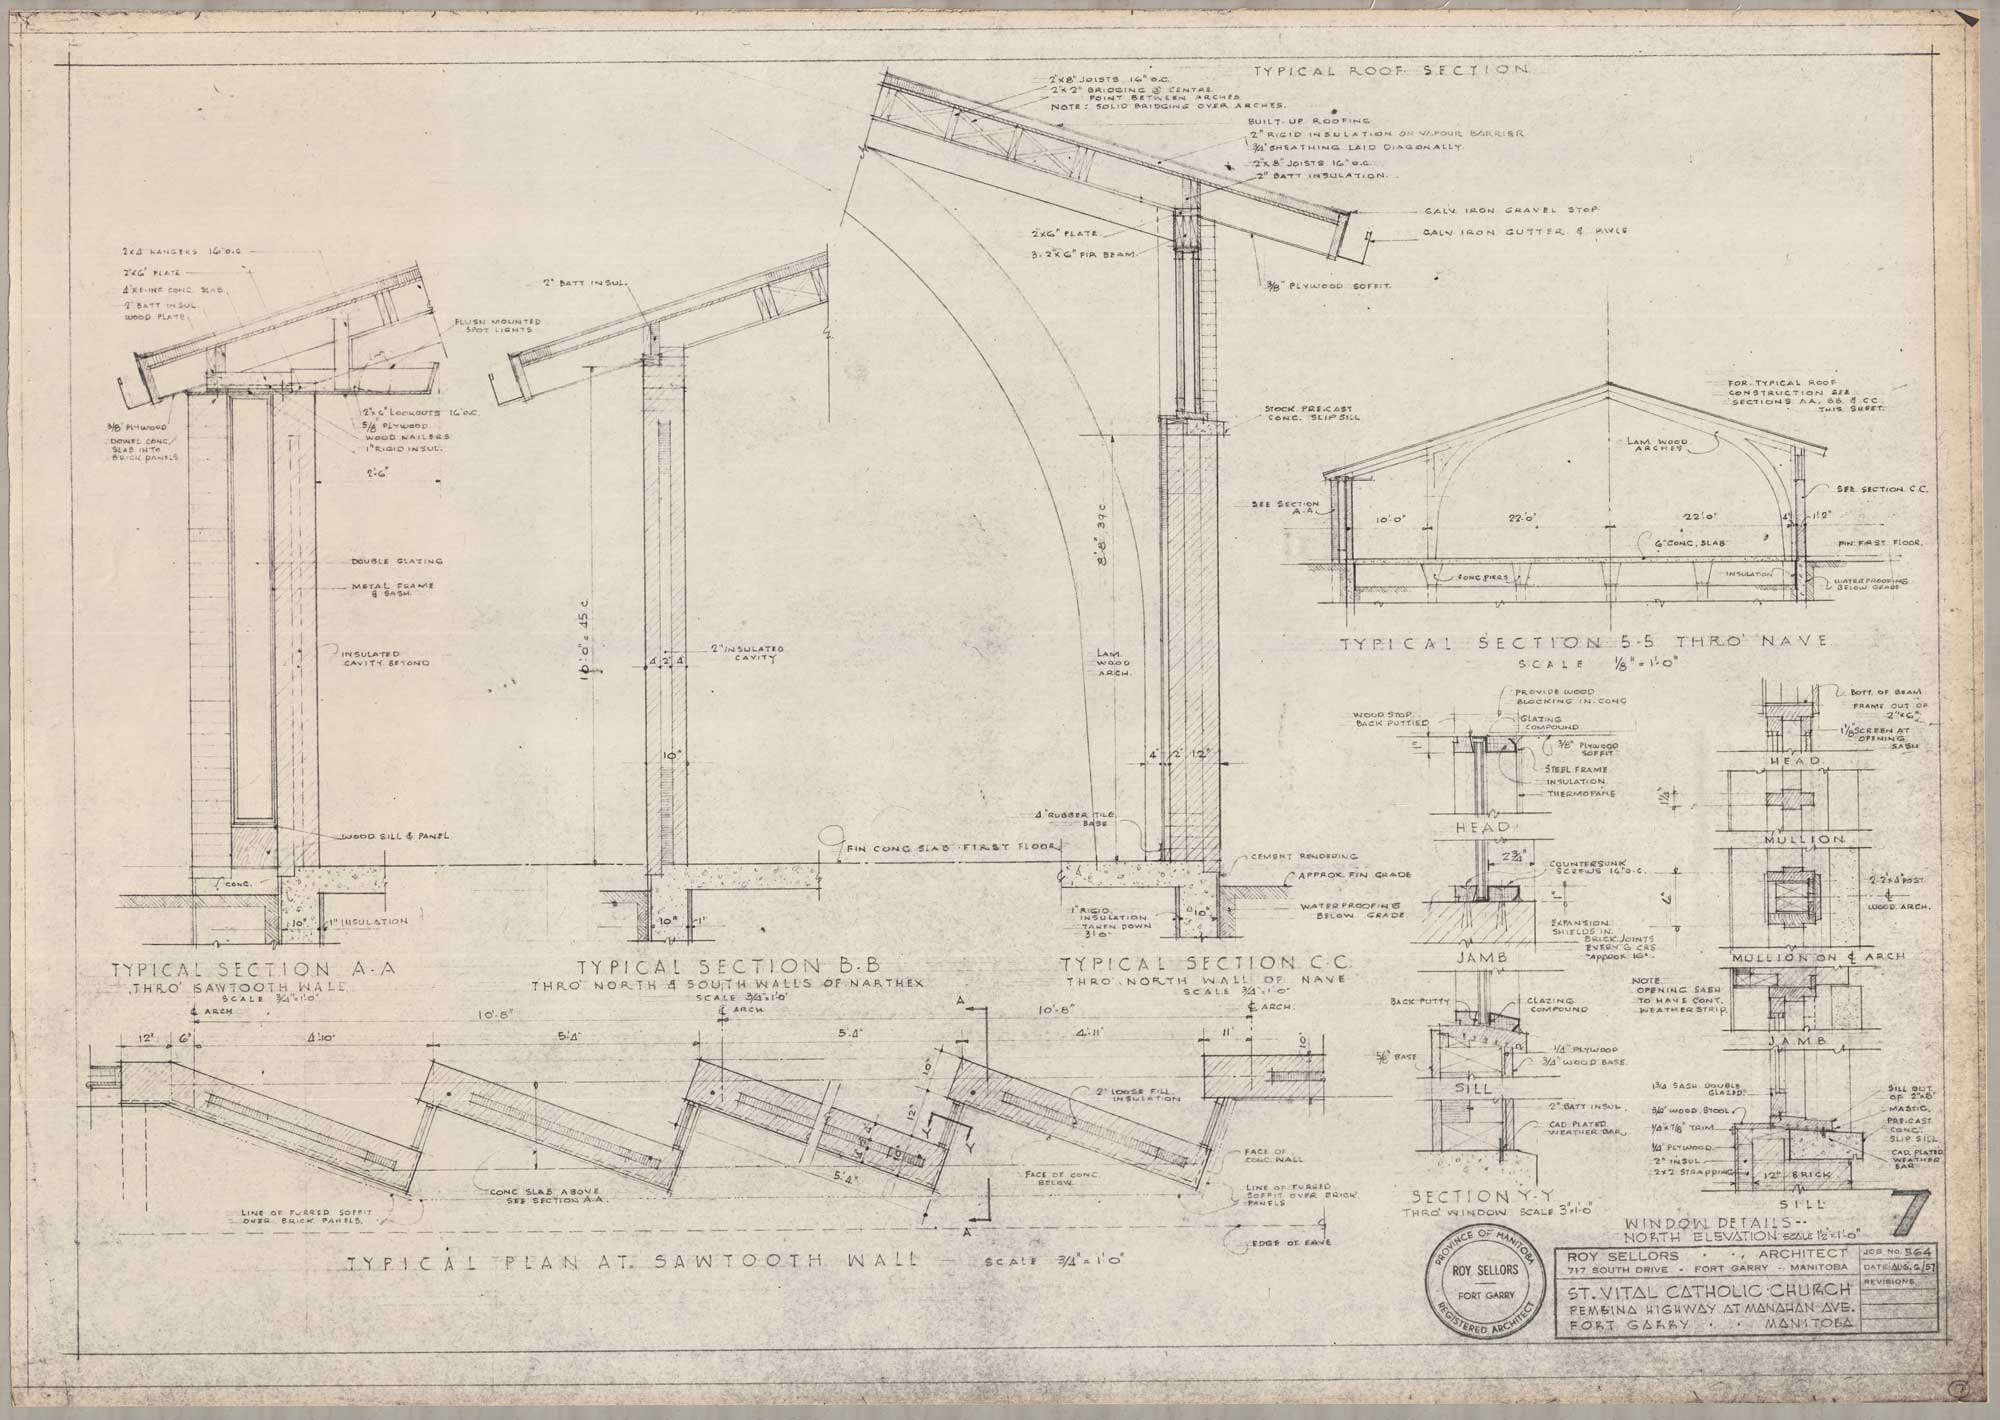 Image shows drawings of the arches over the hall and nave, the sawtooth wall, and window details for St. Vital Church.